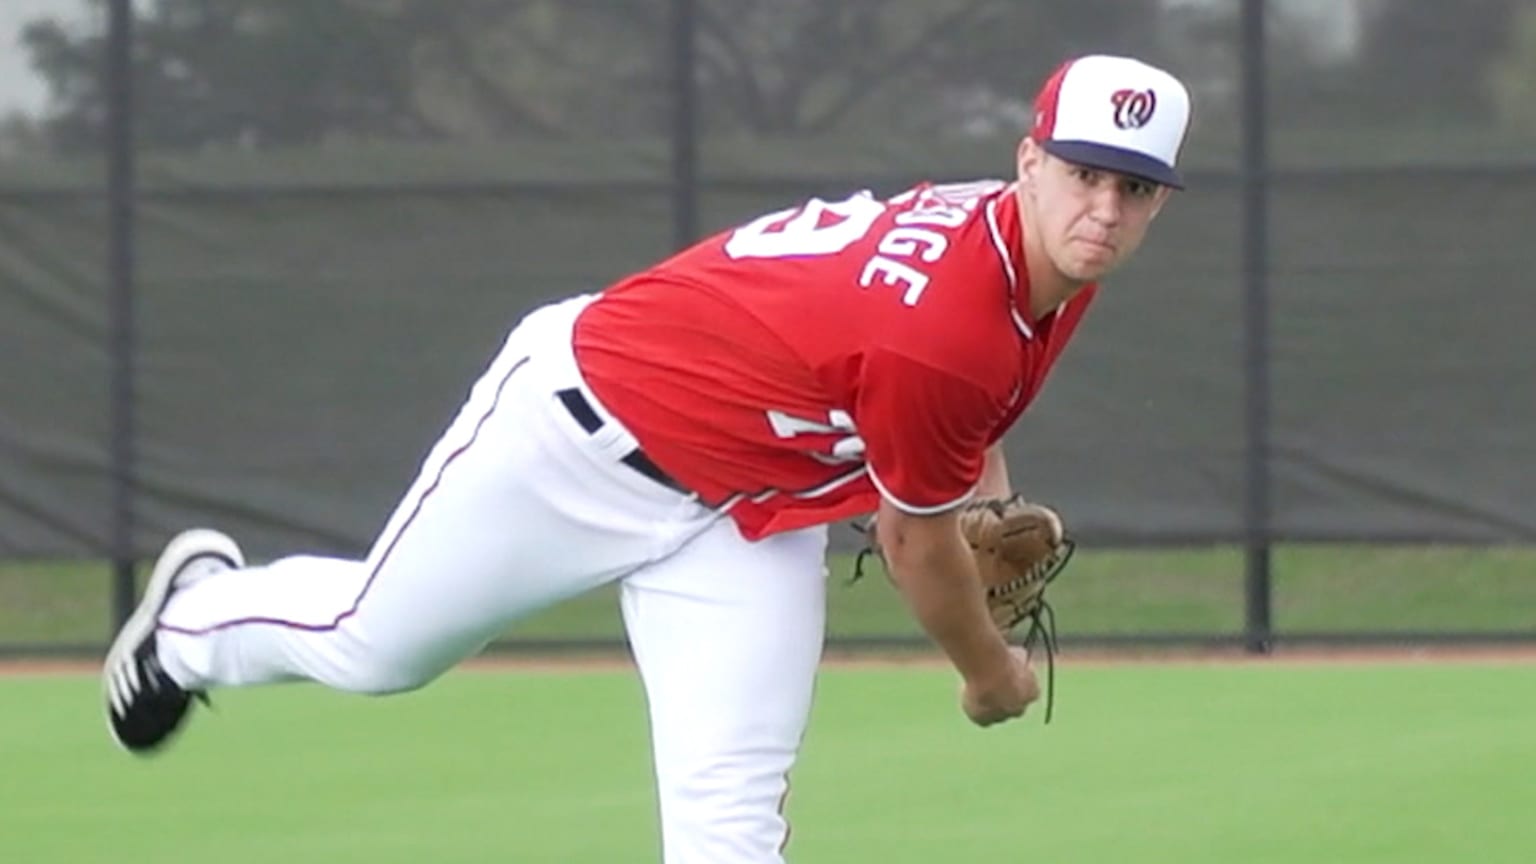 Jackson Rutledge, Nats open twin bill with win over Braves